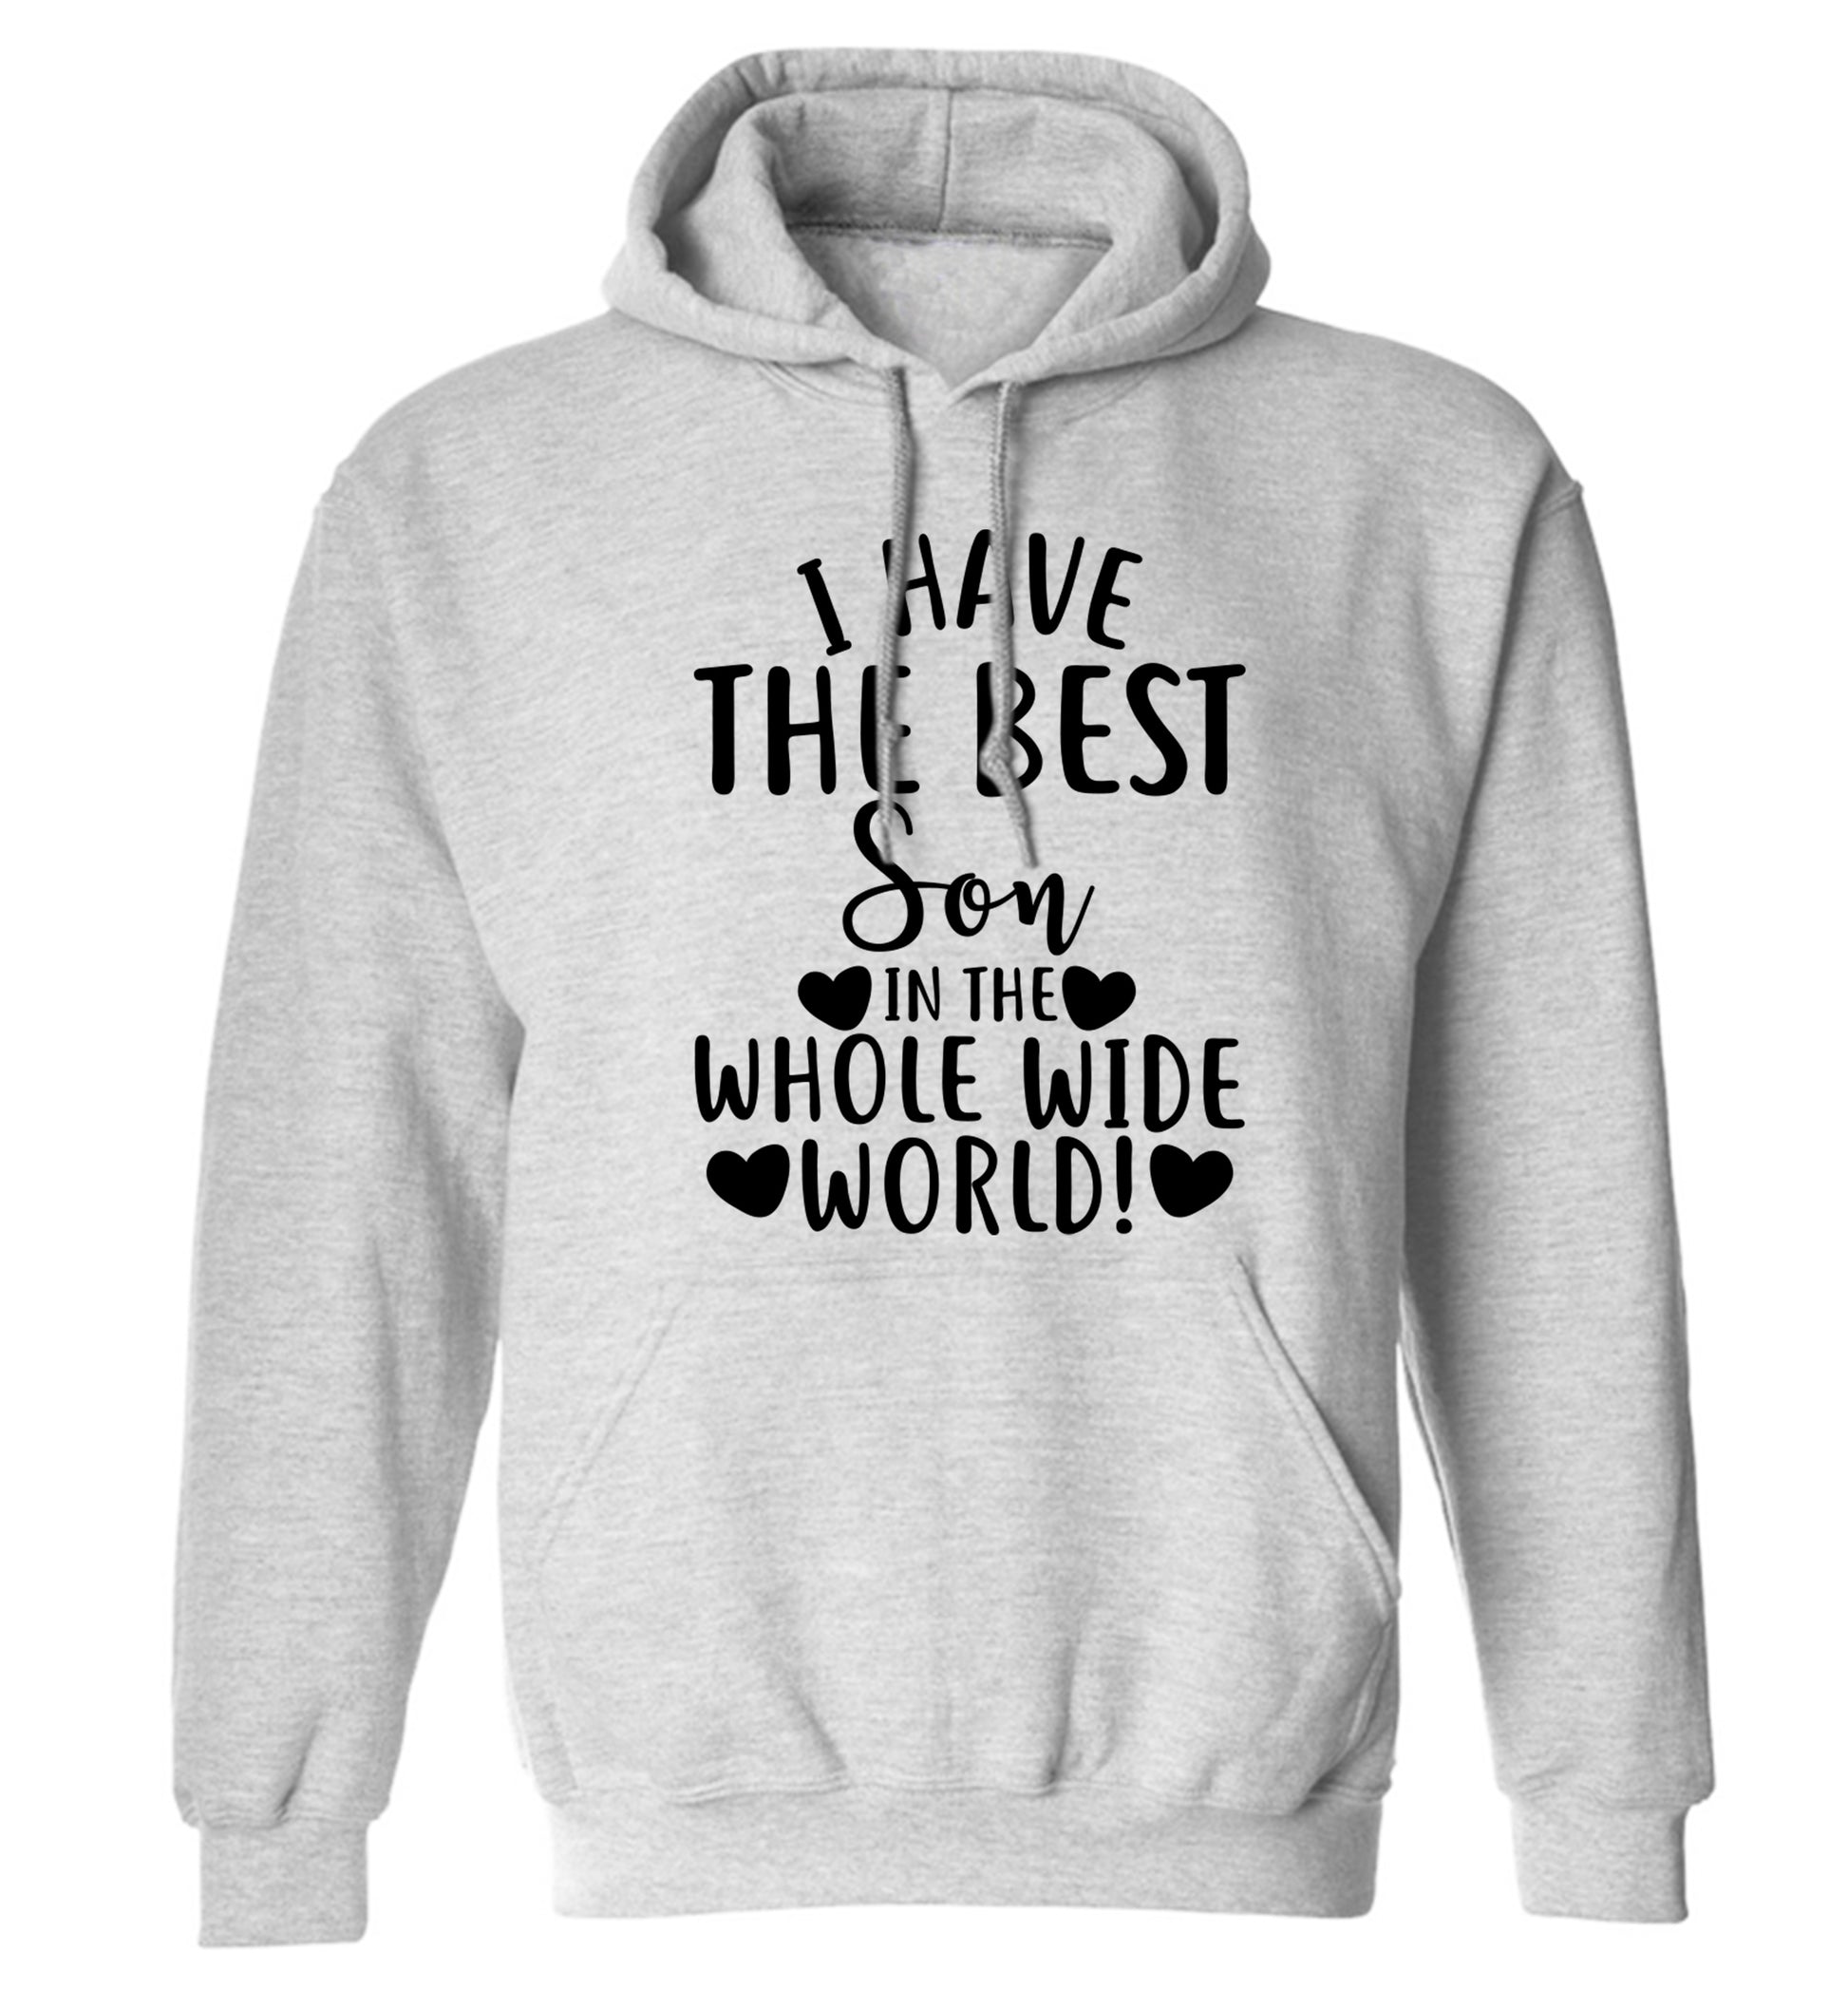 I have the best son in the whole wide world! adults unisex grey hoodie 2XL